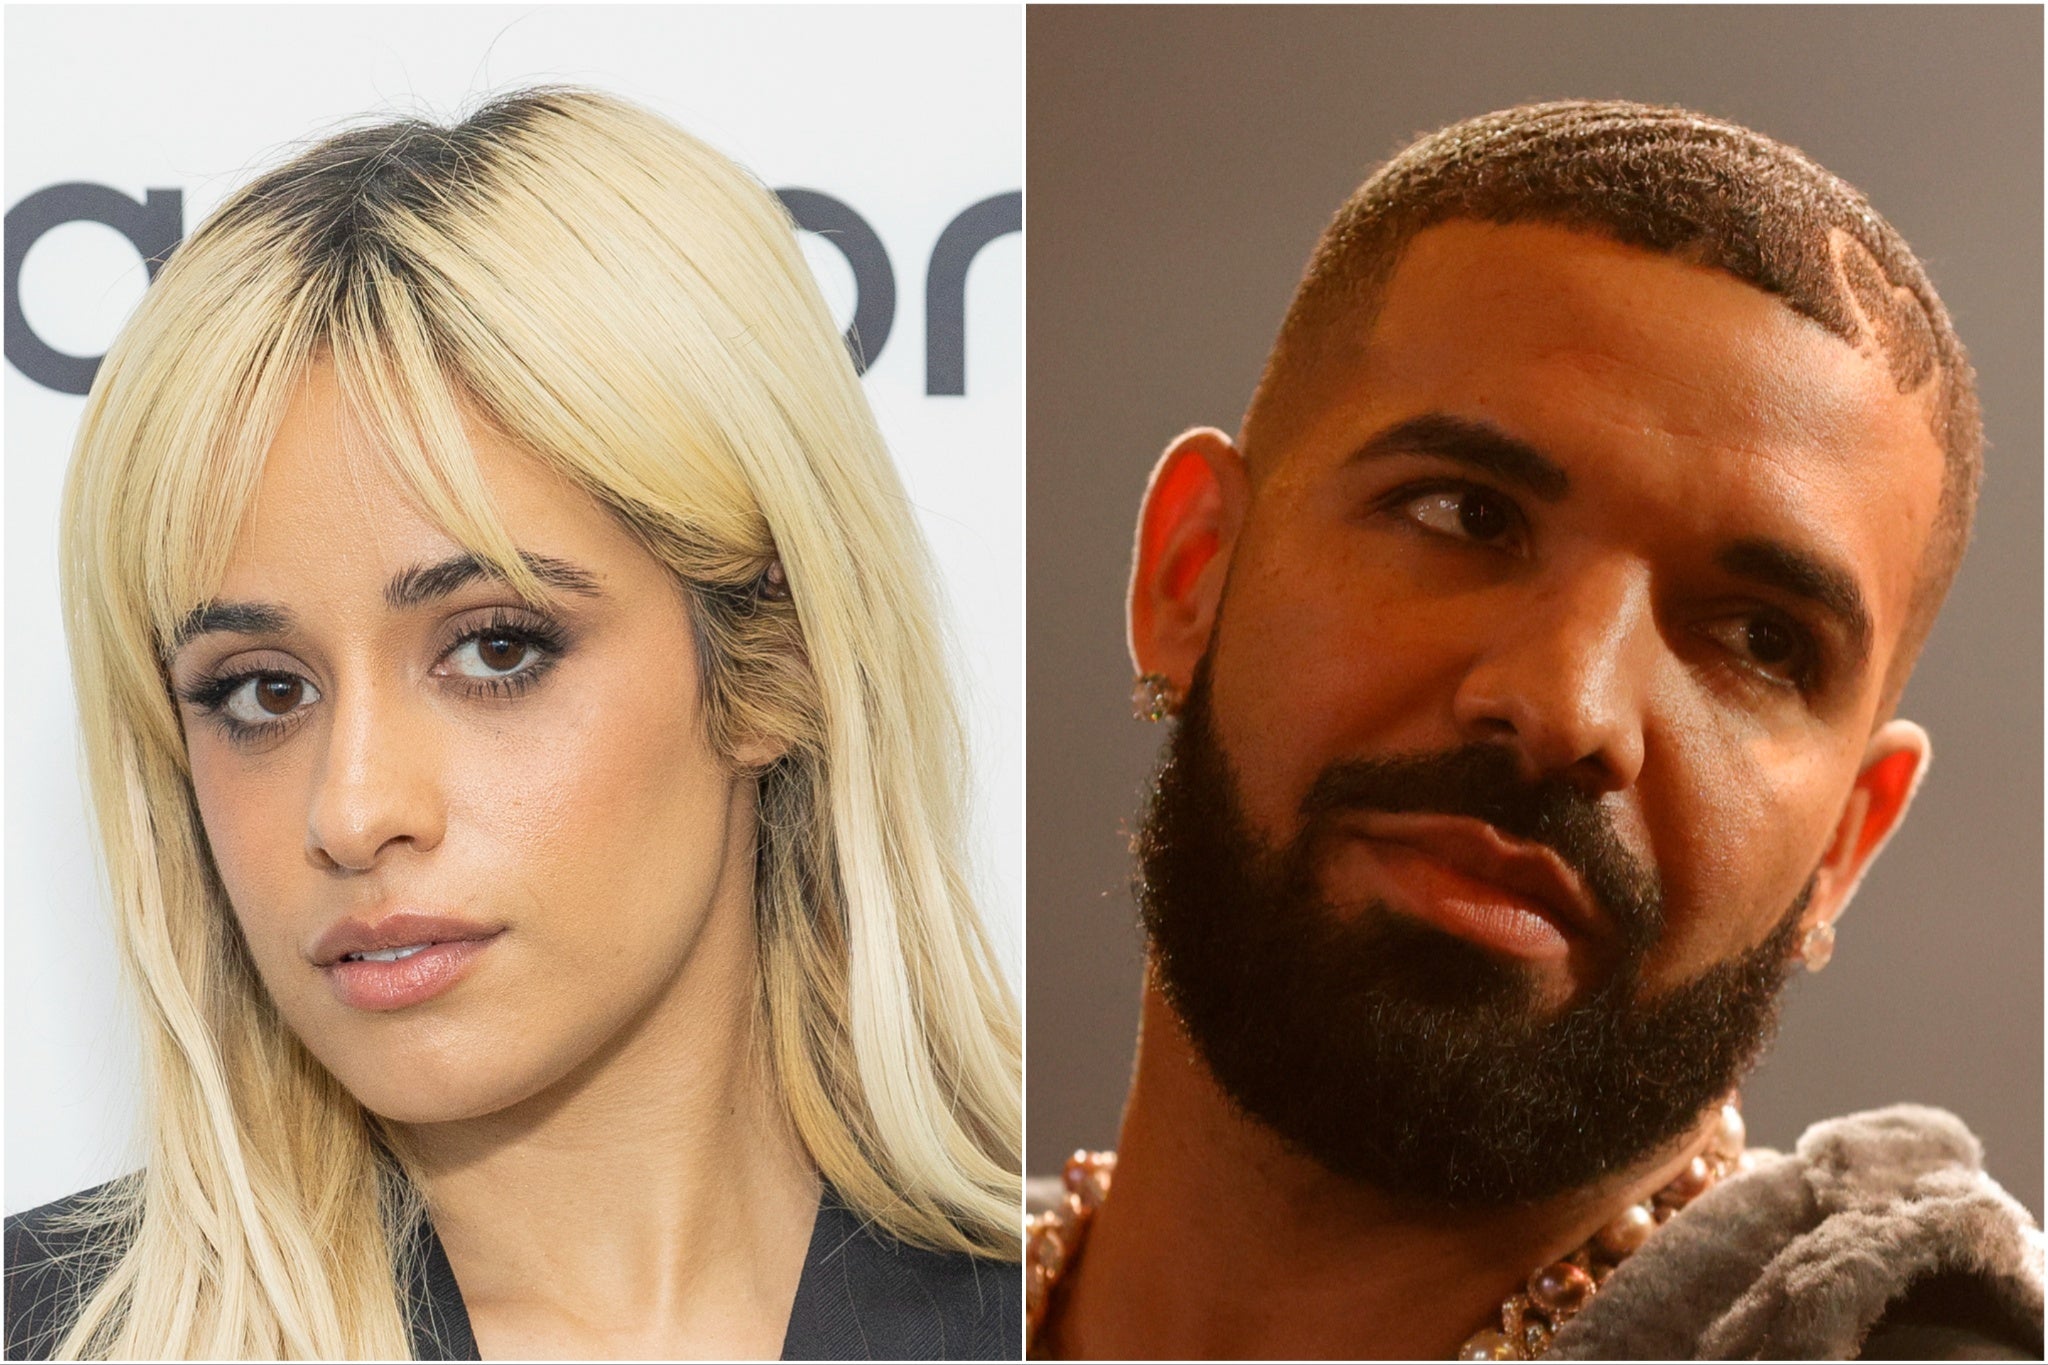 Drake agreed to feature on Cabello’s album after she contacted him online